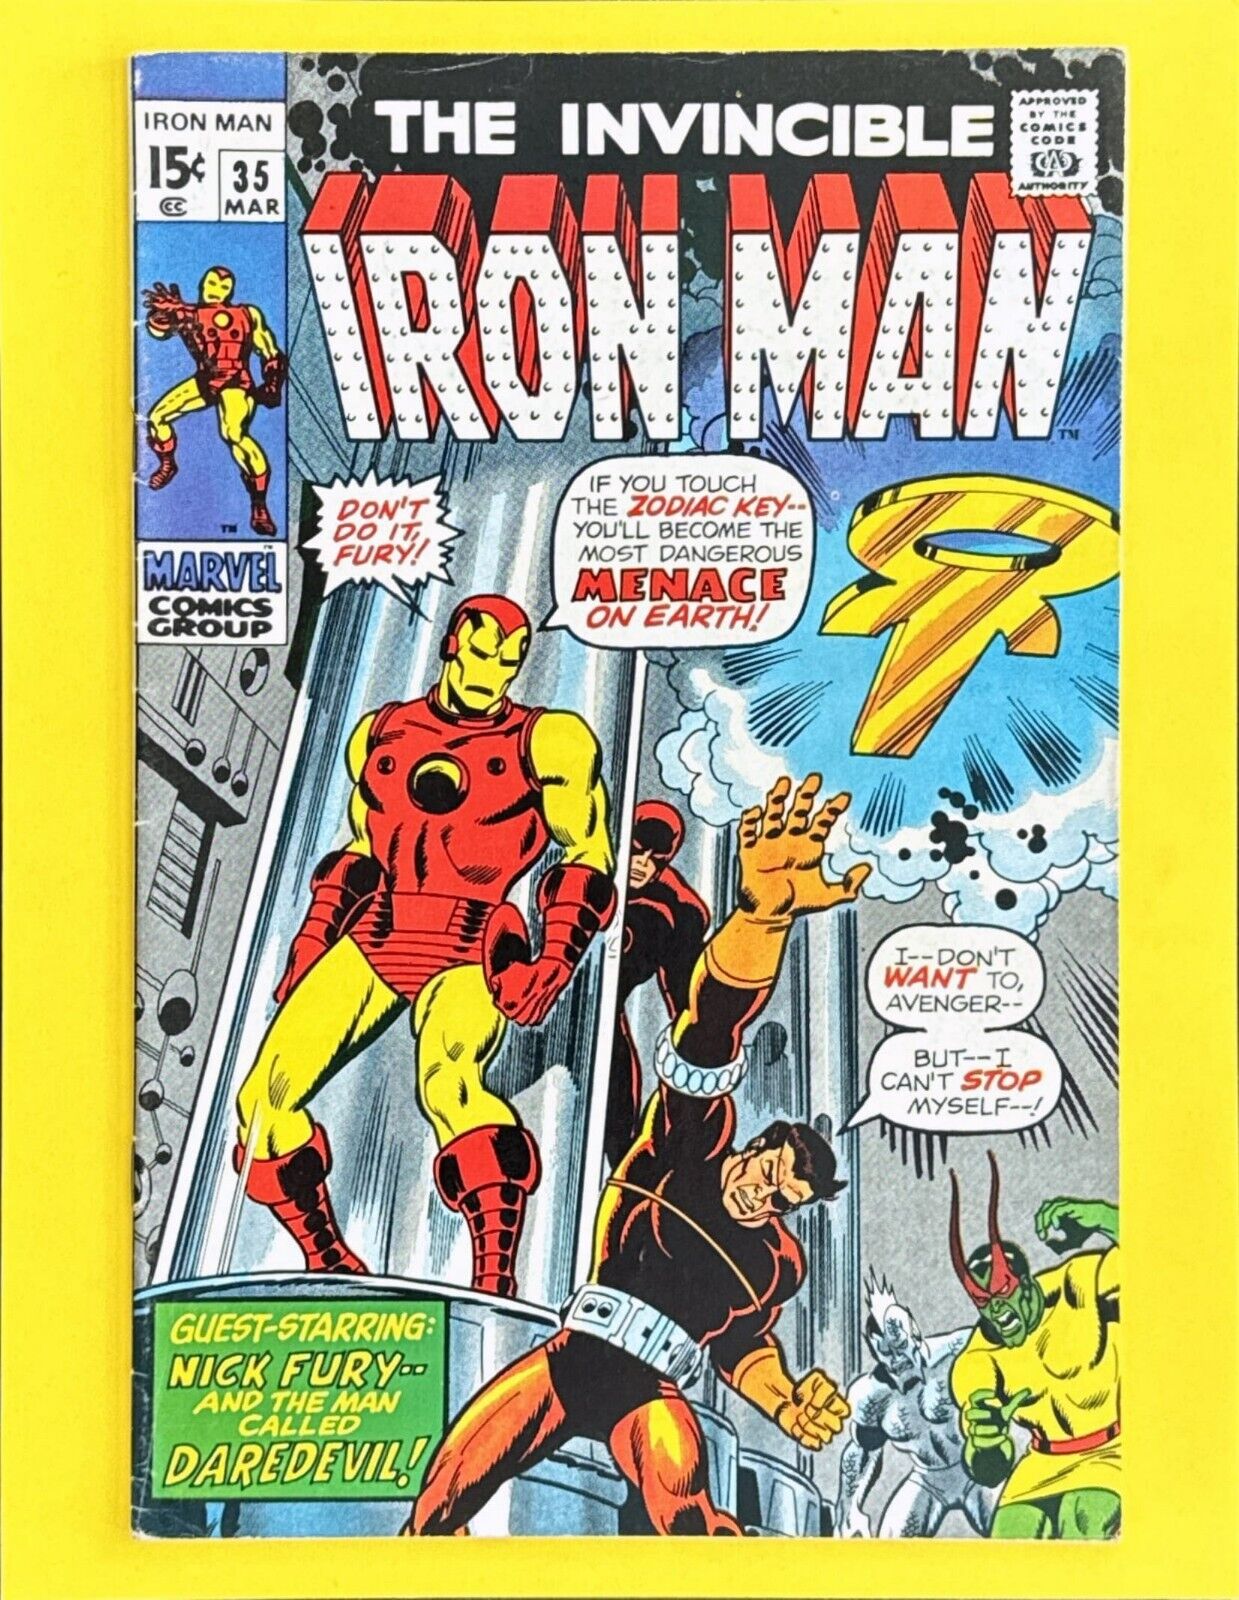 The Invincible Iron Man #35: Dry Cleaned: Pressed: Bagged: Boarded FN-VF 7.0